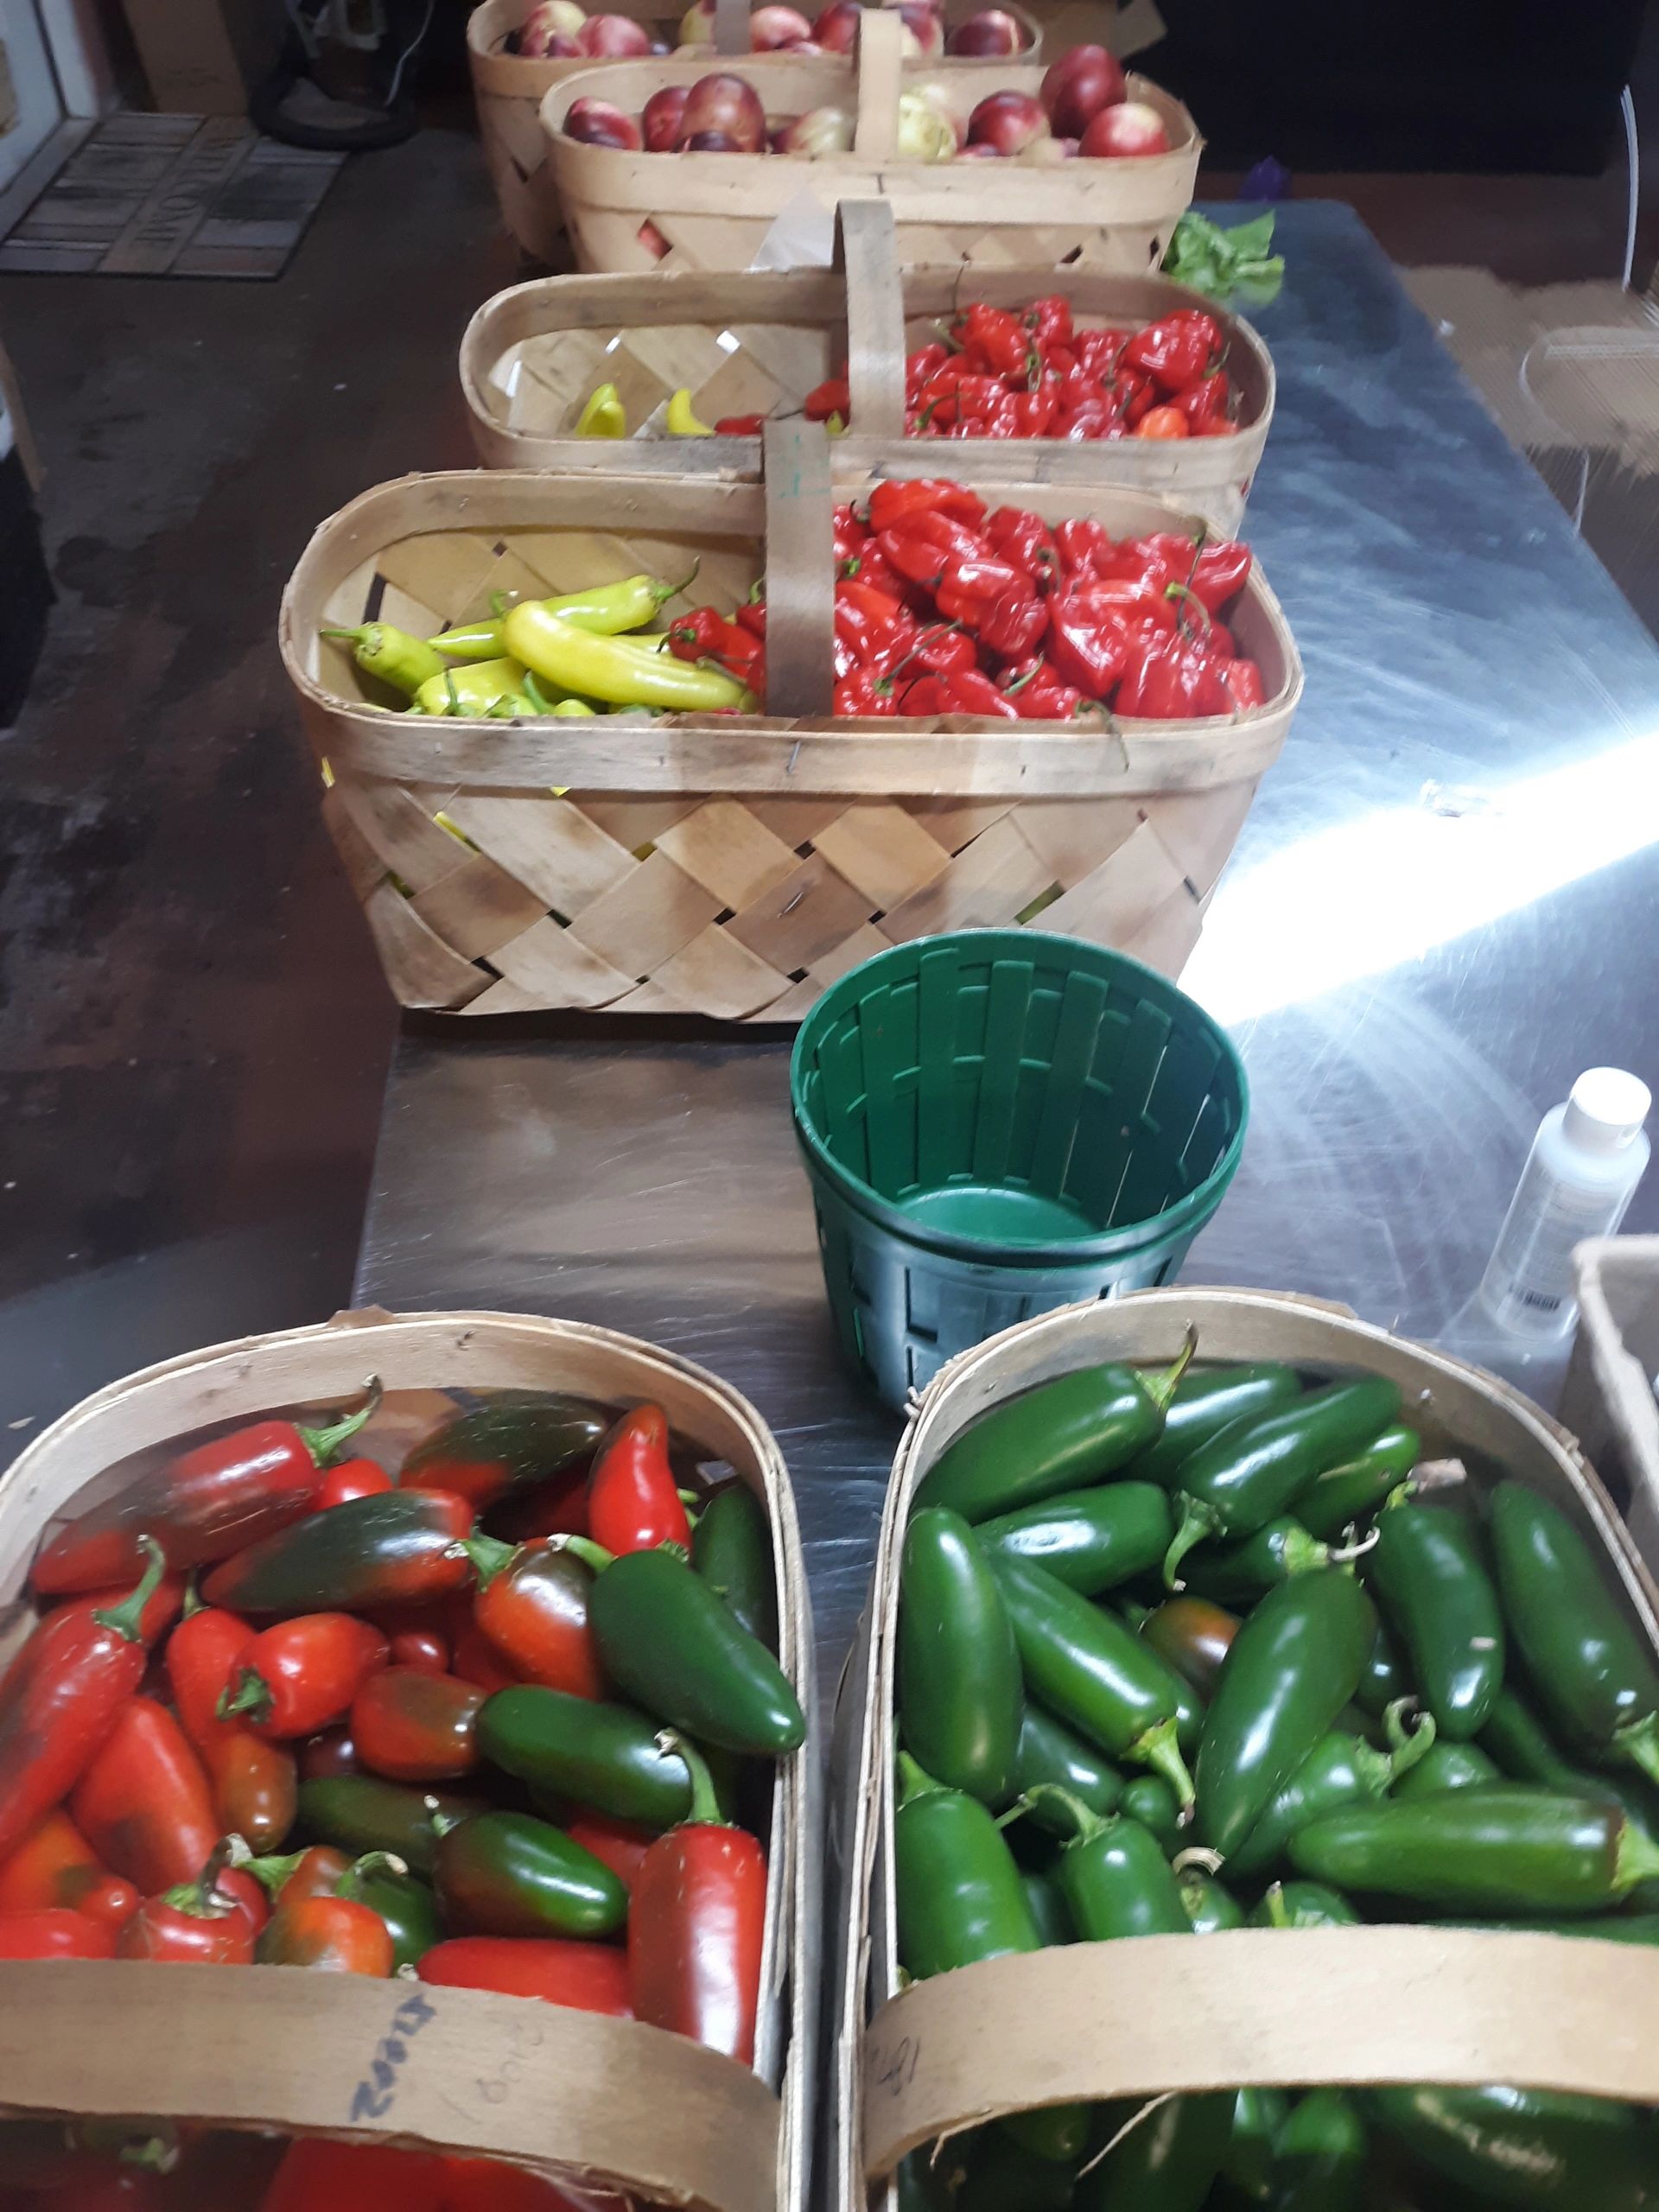 A selection of peppers for our various farmers markets and food boxes